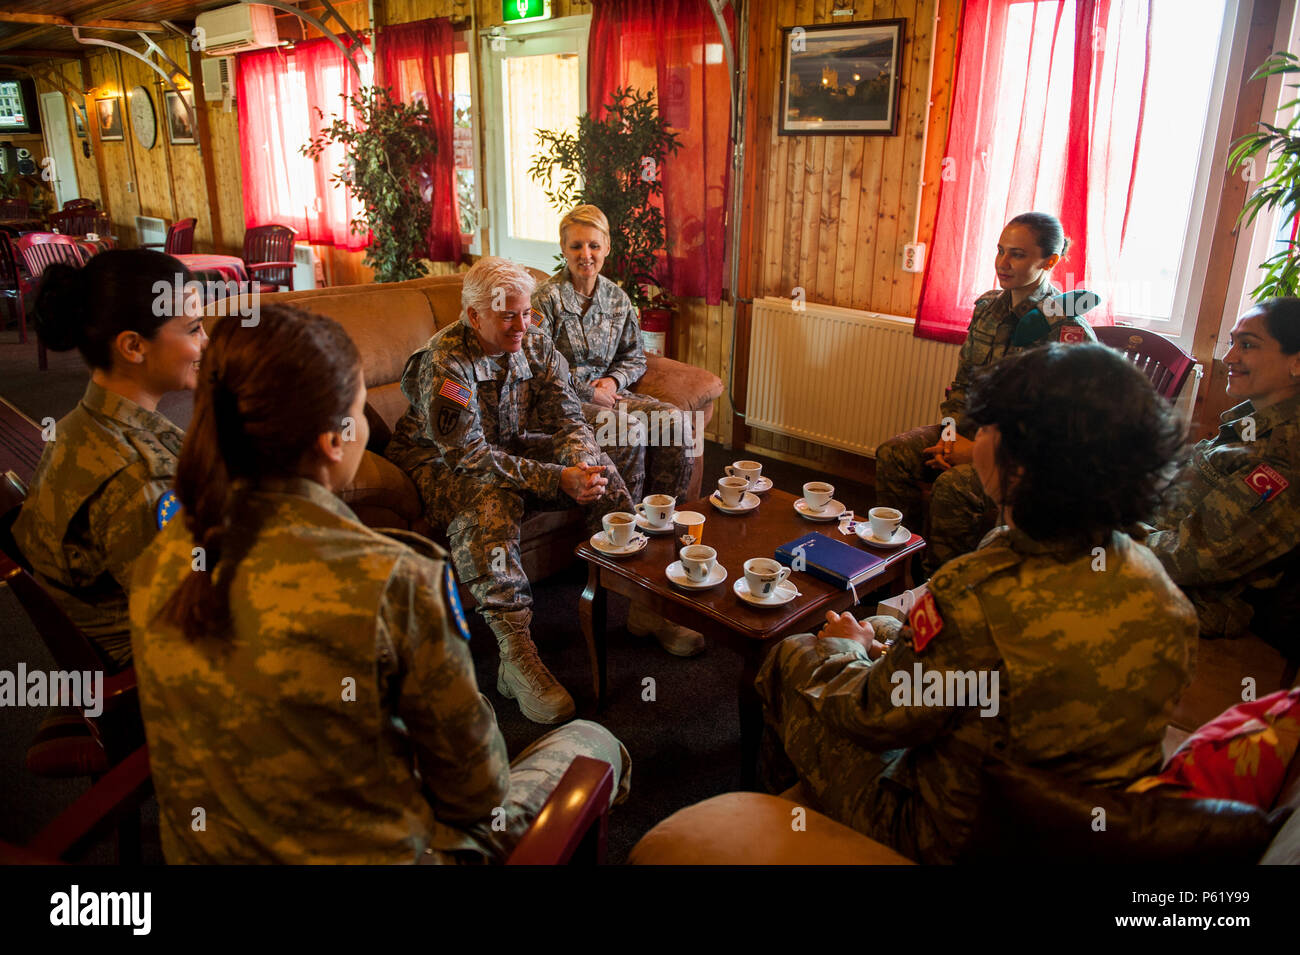 U.S. Army Brig. Gen. Giselle Wilz, commander of the NATO Headquarters Sarajevo, speaks with female officers of the Turkish Land Forces during a mentoring session at Camp Butmir, Bosnia and Herzegovina, April 7, 2016. Wilz discussed cultural differences, women in the military and gave advice on how to be an effective leader. (U.S. Air Force photo by Staff Sgt. Clayton Lenhardt) Stock Photo